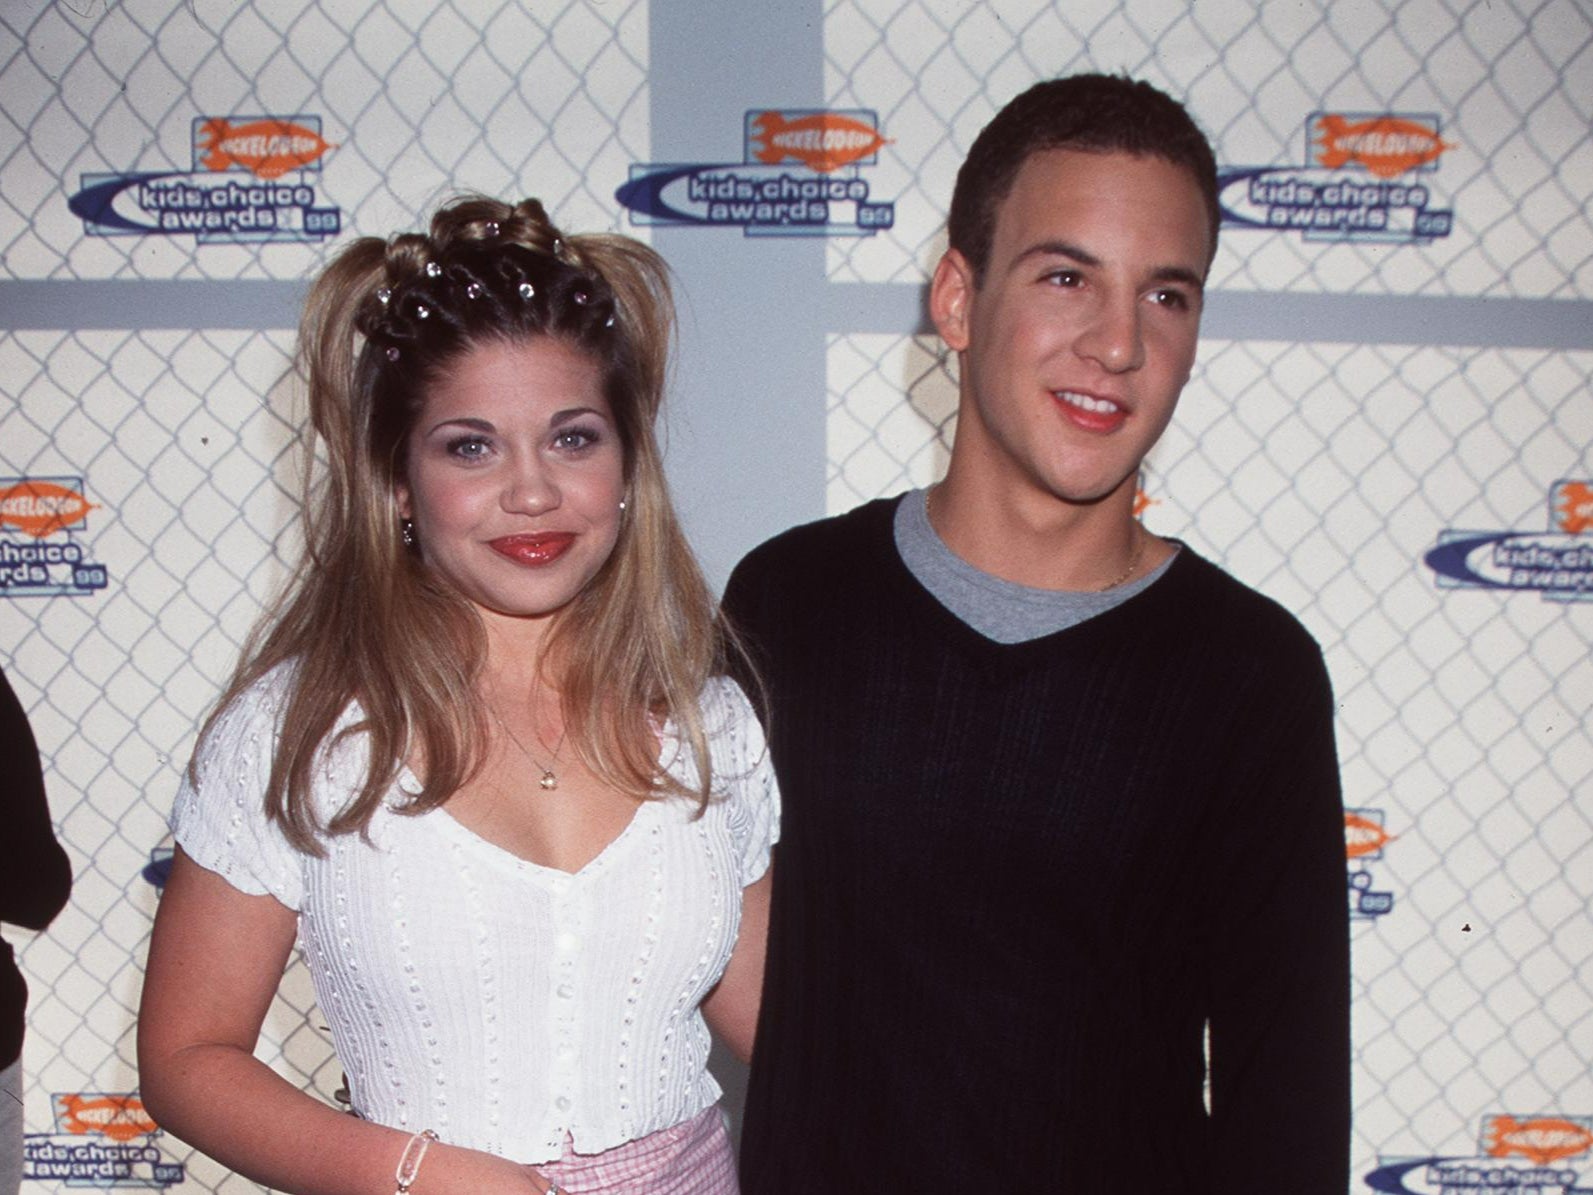 Danielle Fishel and Ben Savage in 1999